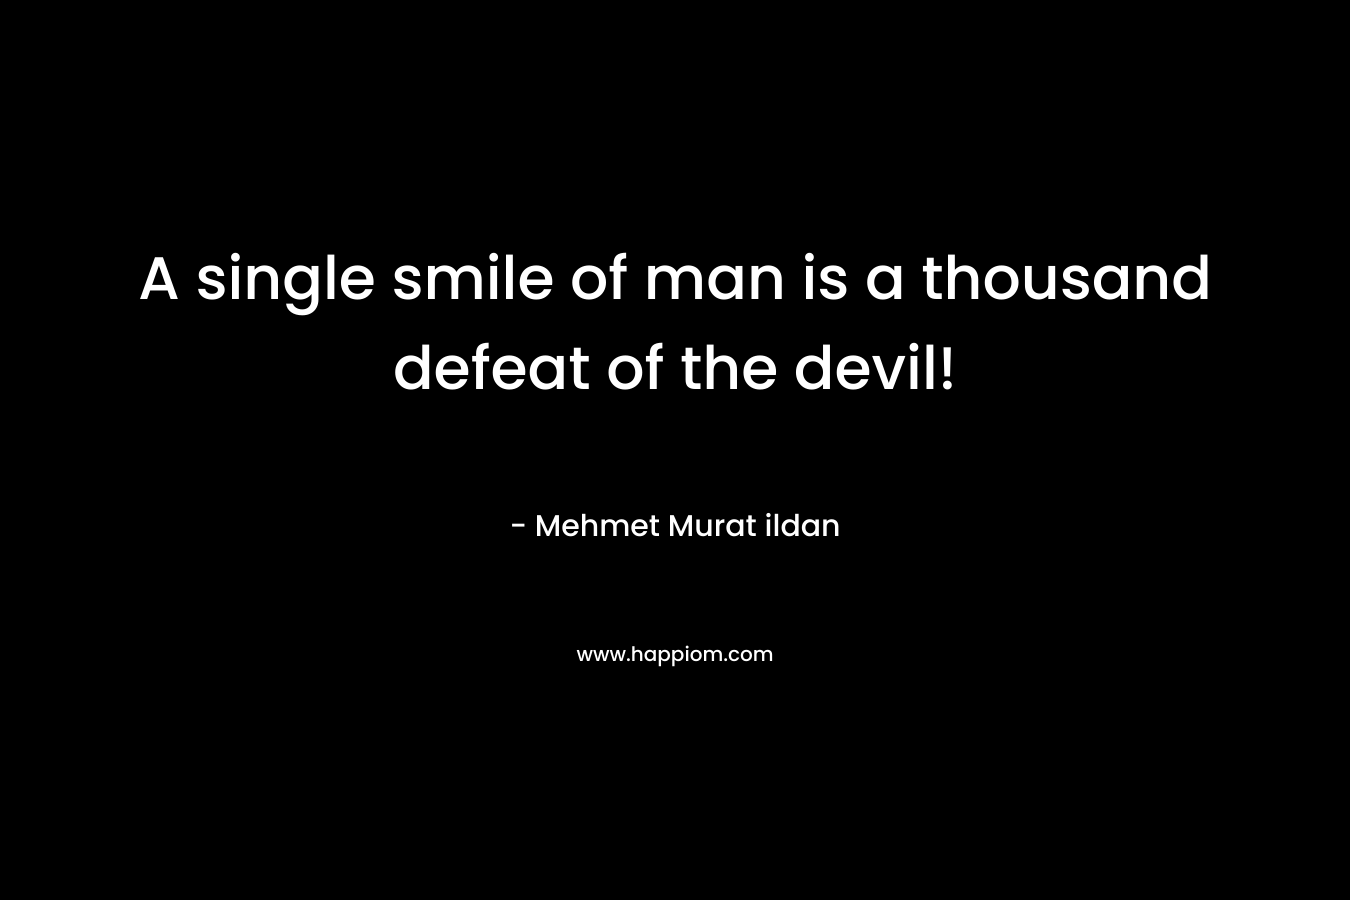 A single smile of man is a thousand defeat of the devil!